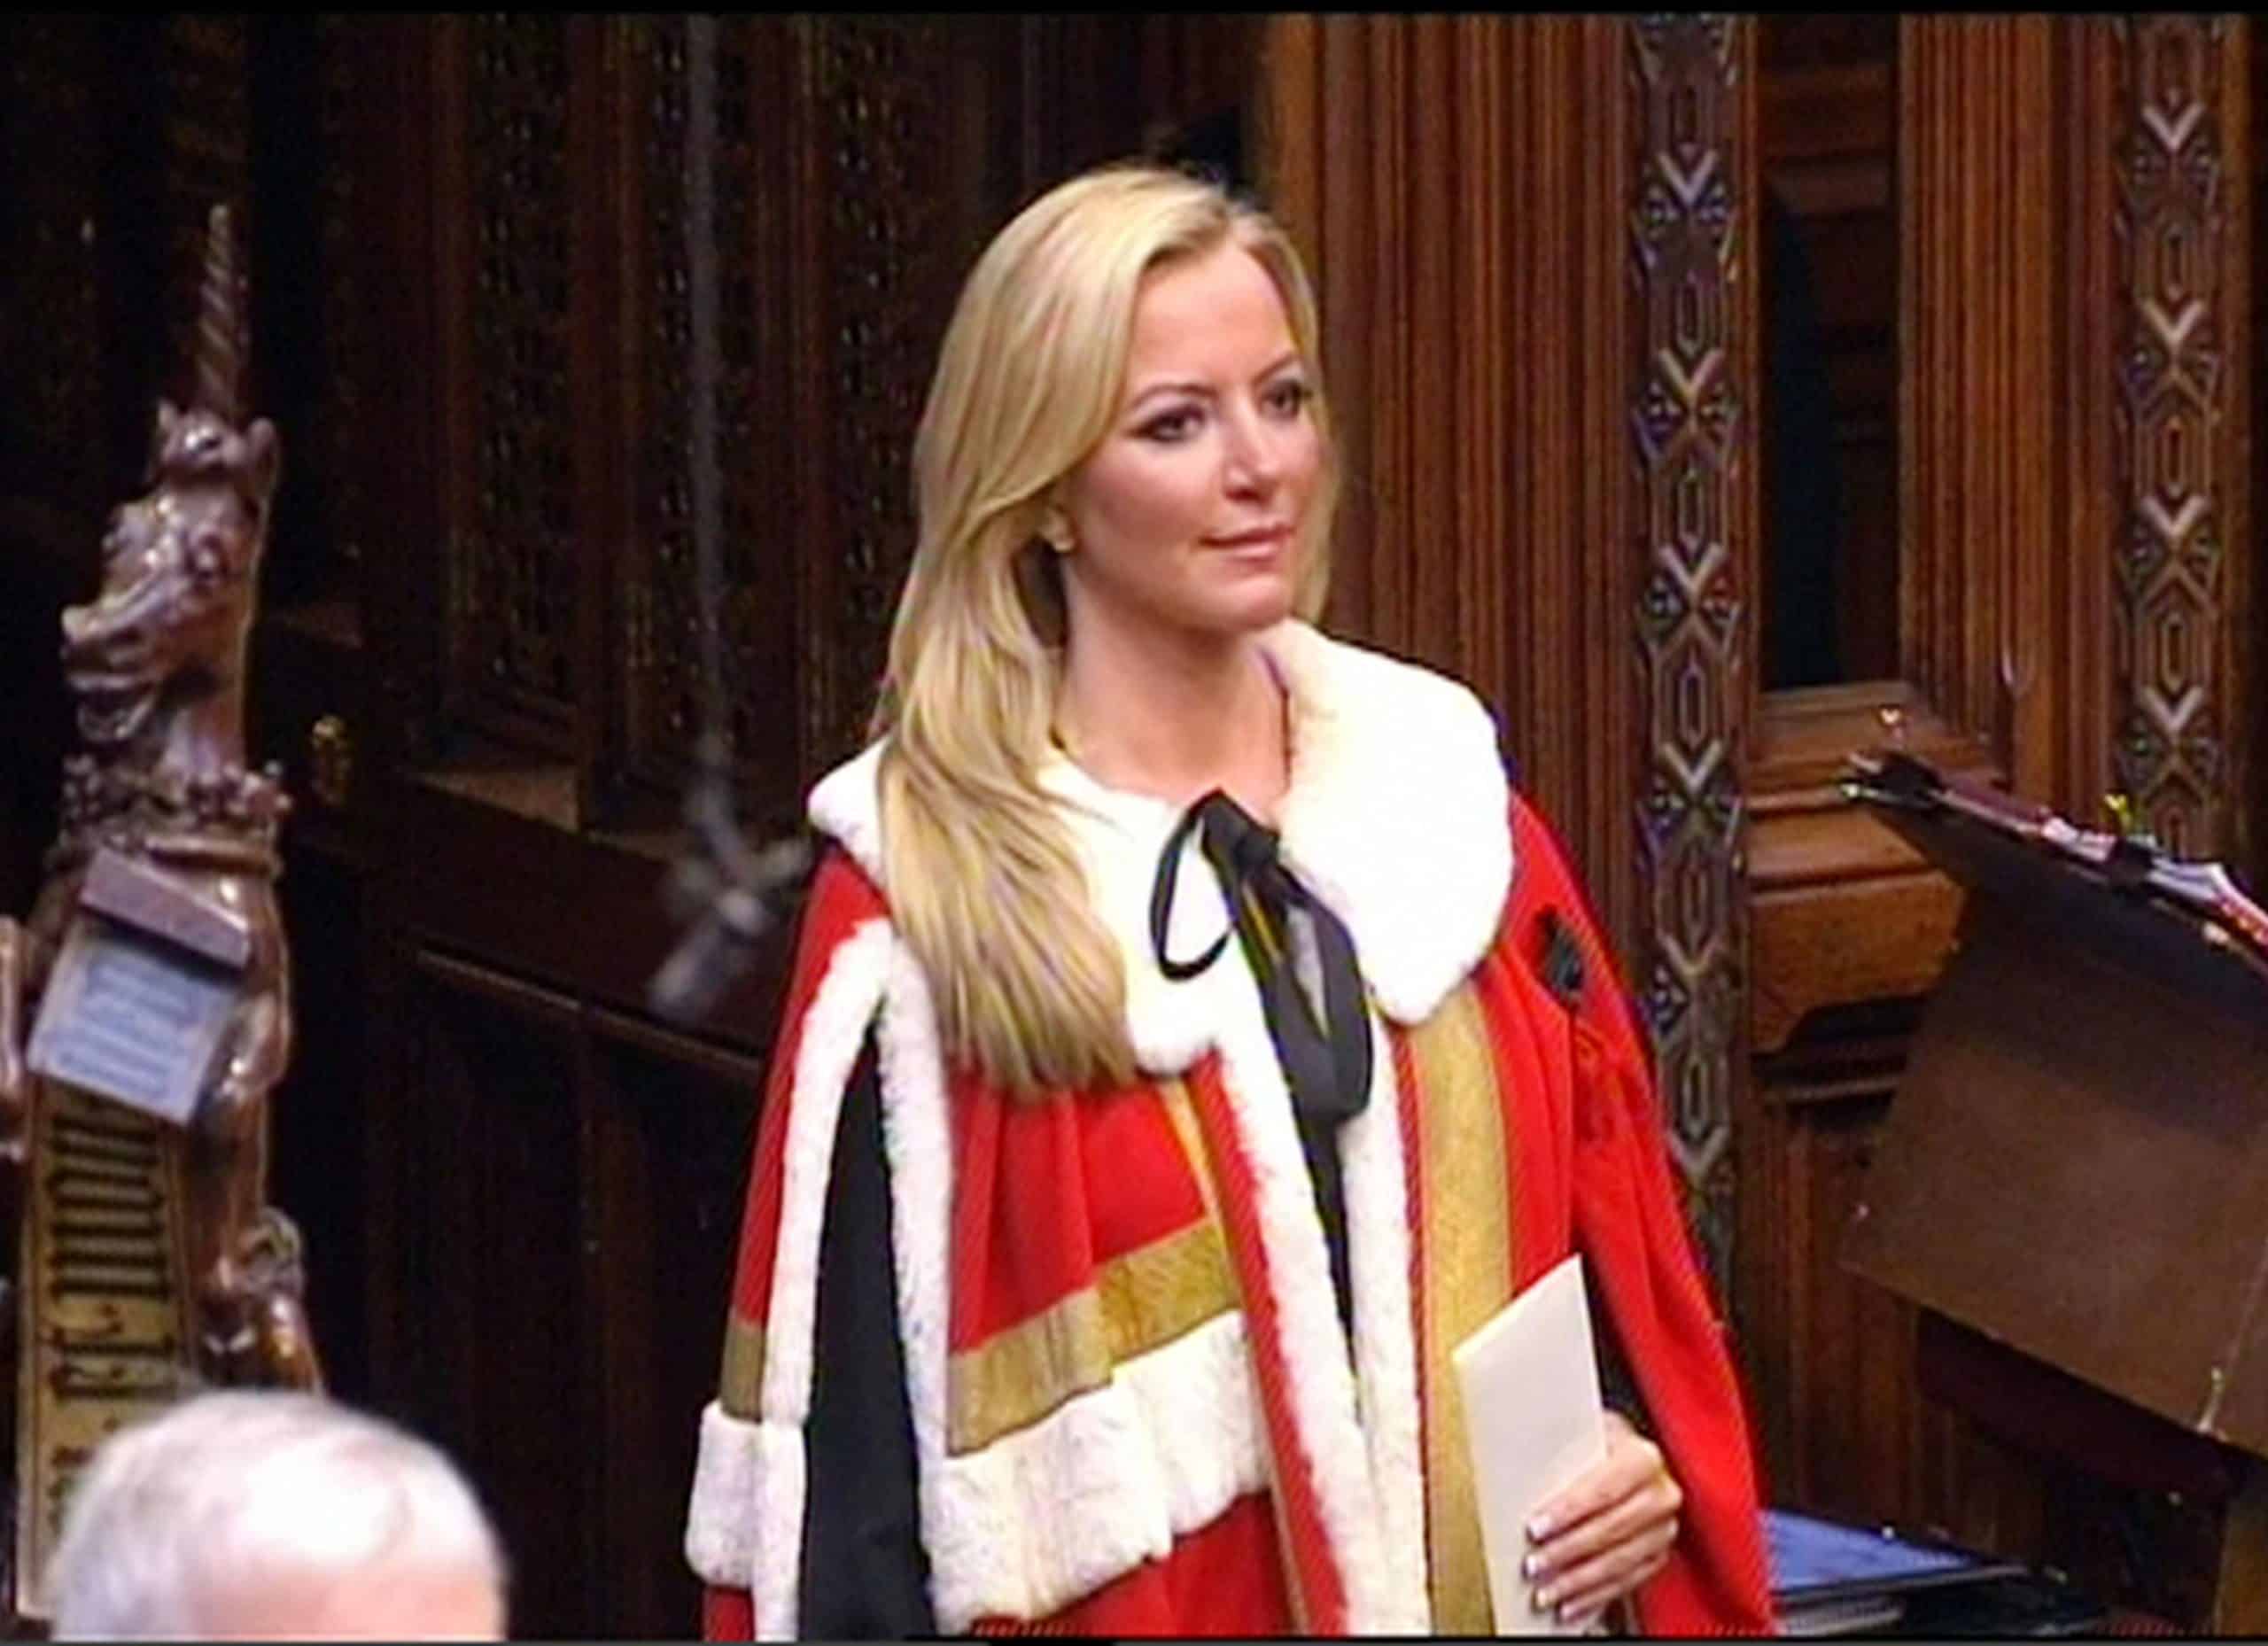 Michelle Mone, A Tory Colleague, Has Been Accused Of Sending A Racist And Nasty Message.